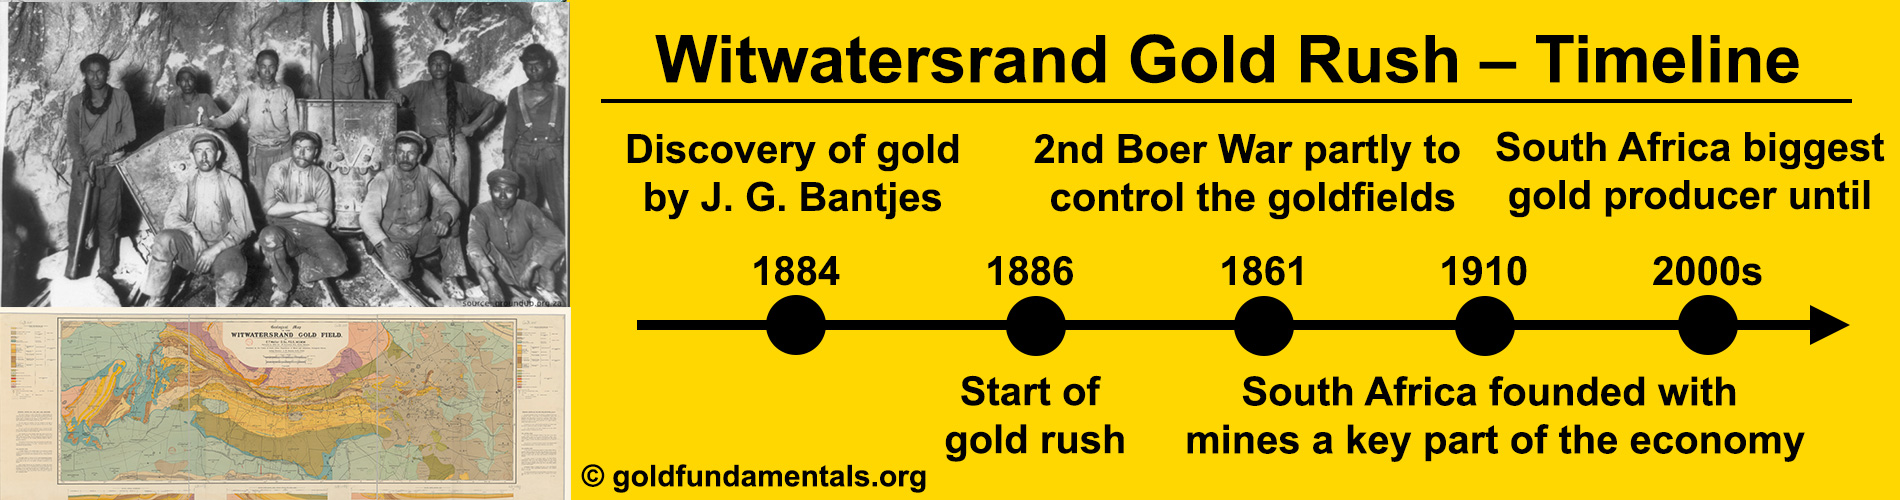 Witwatersrand Gold Rush 1886 - timeline of events.